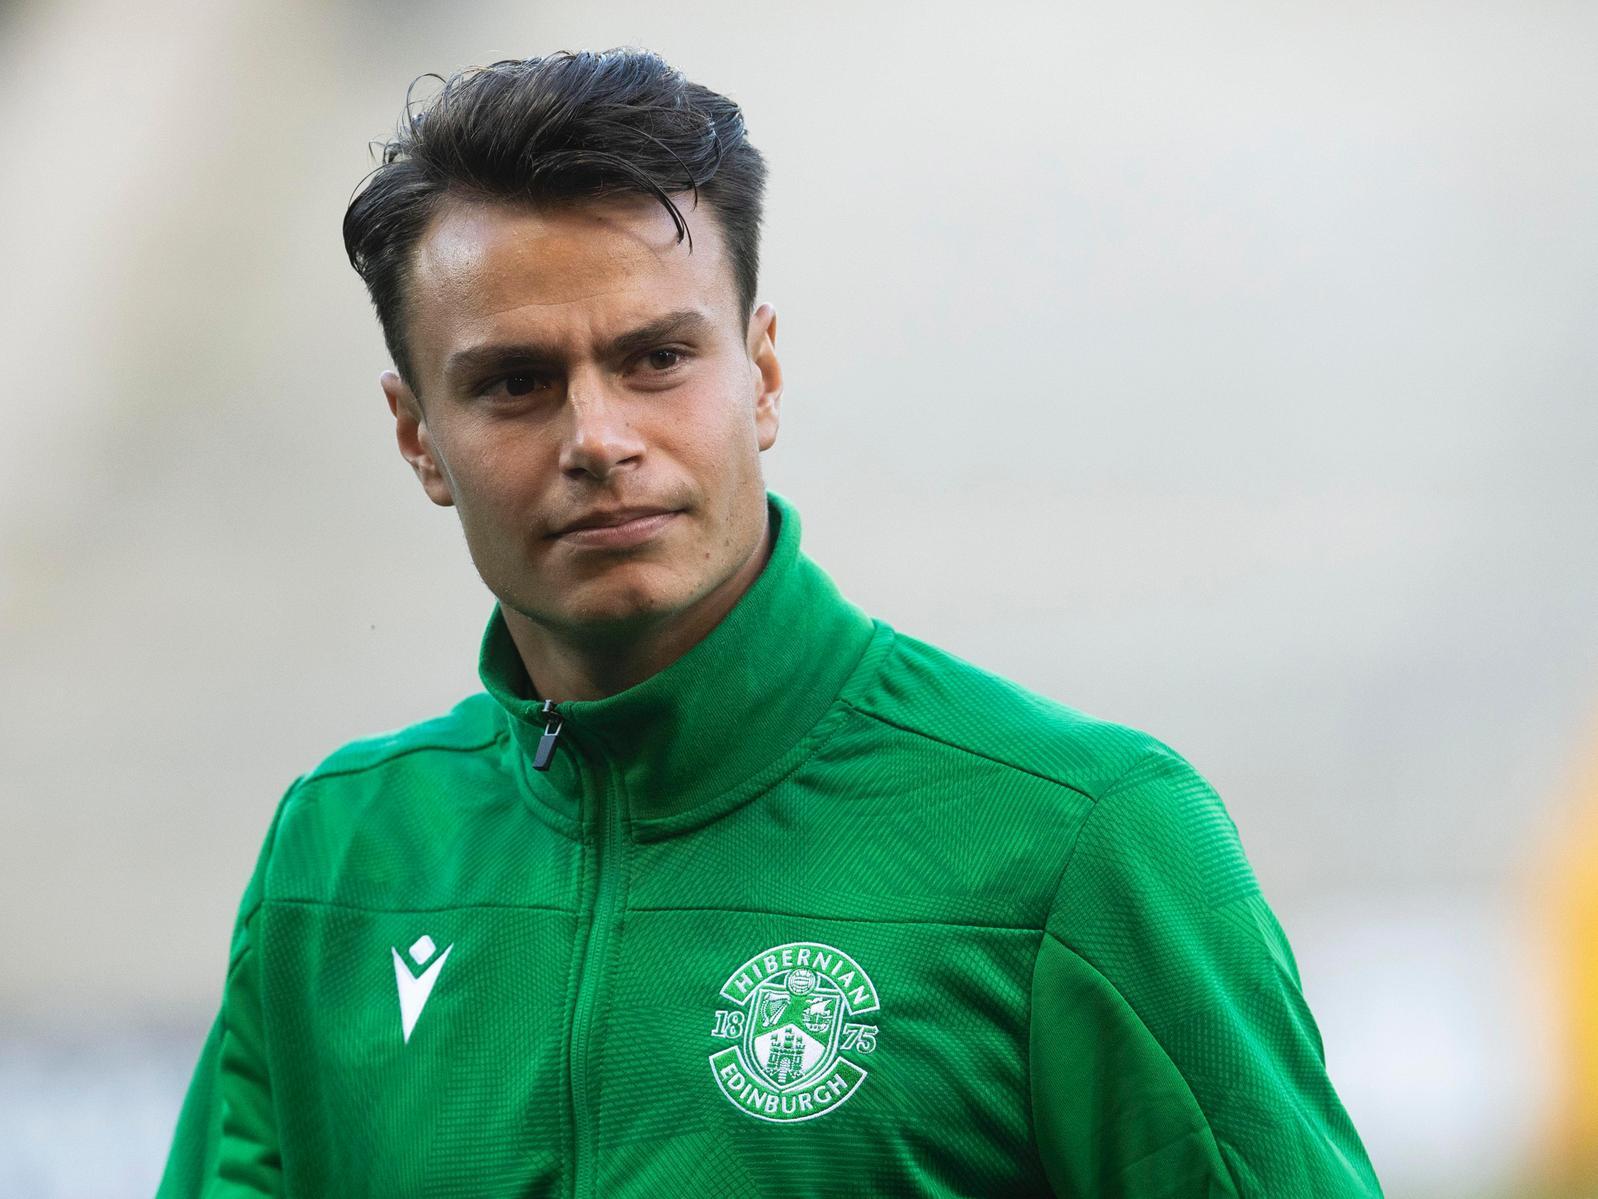 Never anyone’s idea of a superstar, the Swedish midfielder – signed in the summer of 2019 – put in a solid two-and-a-half years in a Hibs side boasting such talents as Nisbet, Ryan Porteous and Jackson Irvine, to name a few. Not always a starter. But Hibs could do with someone of his ilk now. 